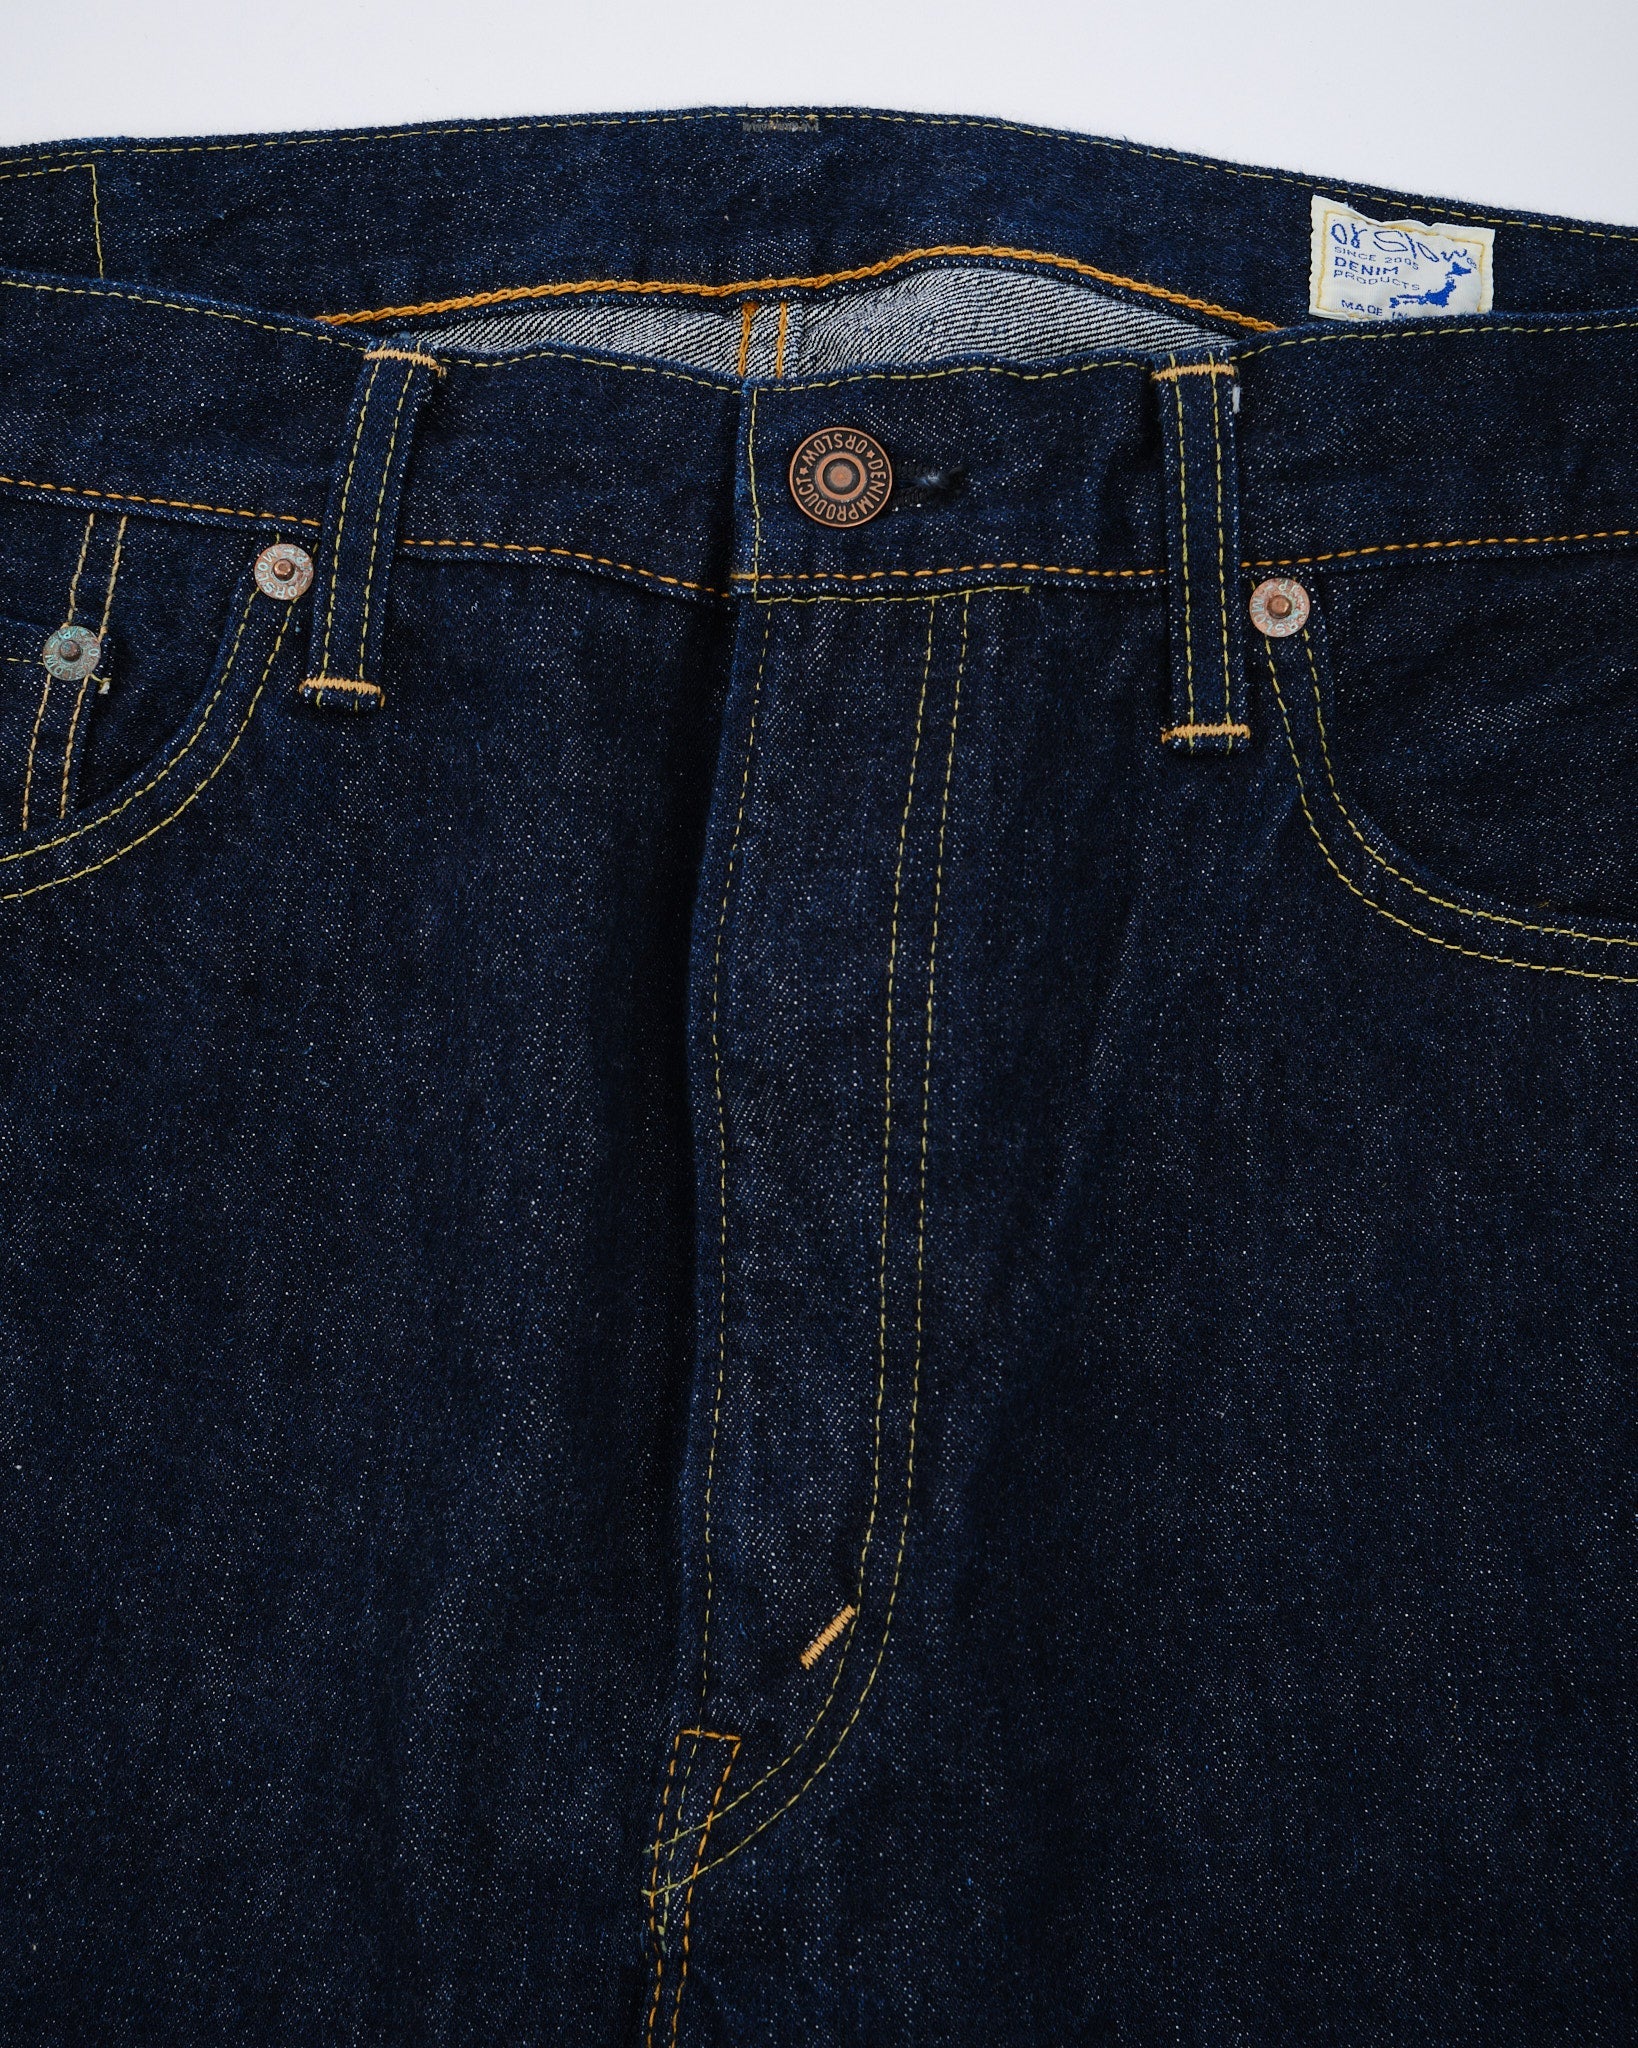 107 IVY FIT SELVEDGE DENIM ONE WASH - Meadow